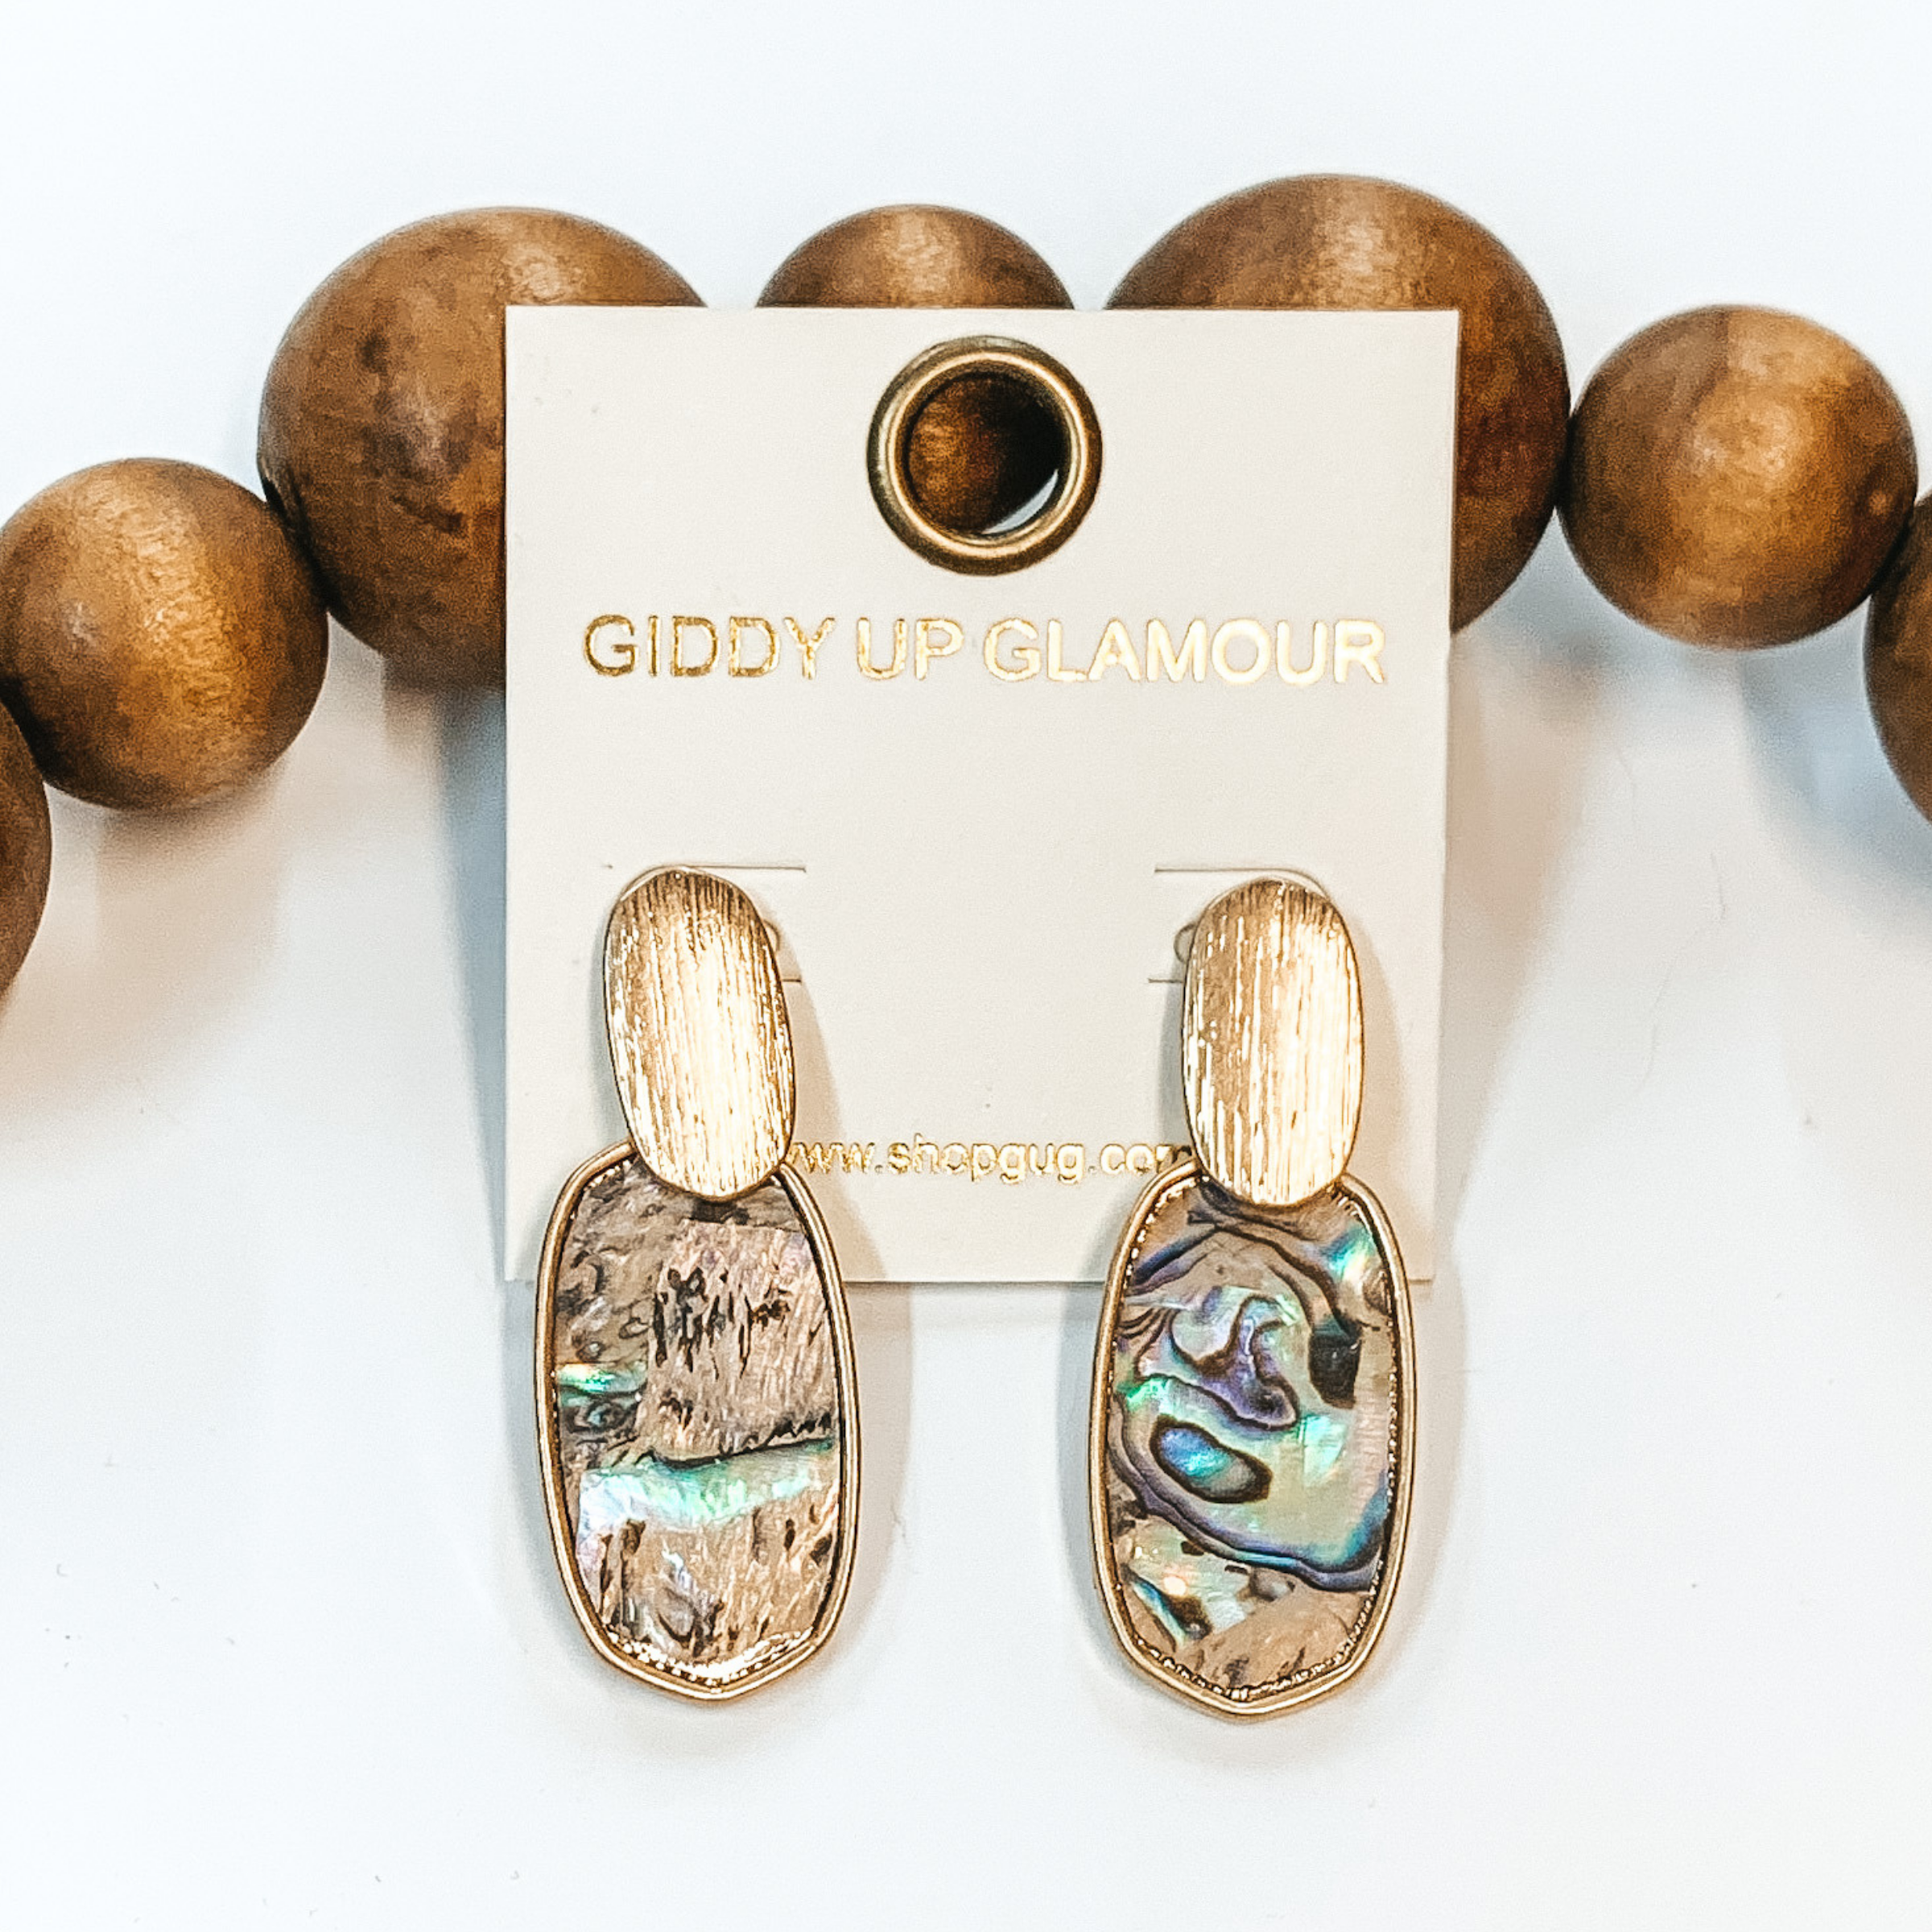 Abalone shell oval shaped earrings with gold  outline and gold accents. Taken in a white background with brown beads as decor.